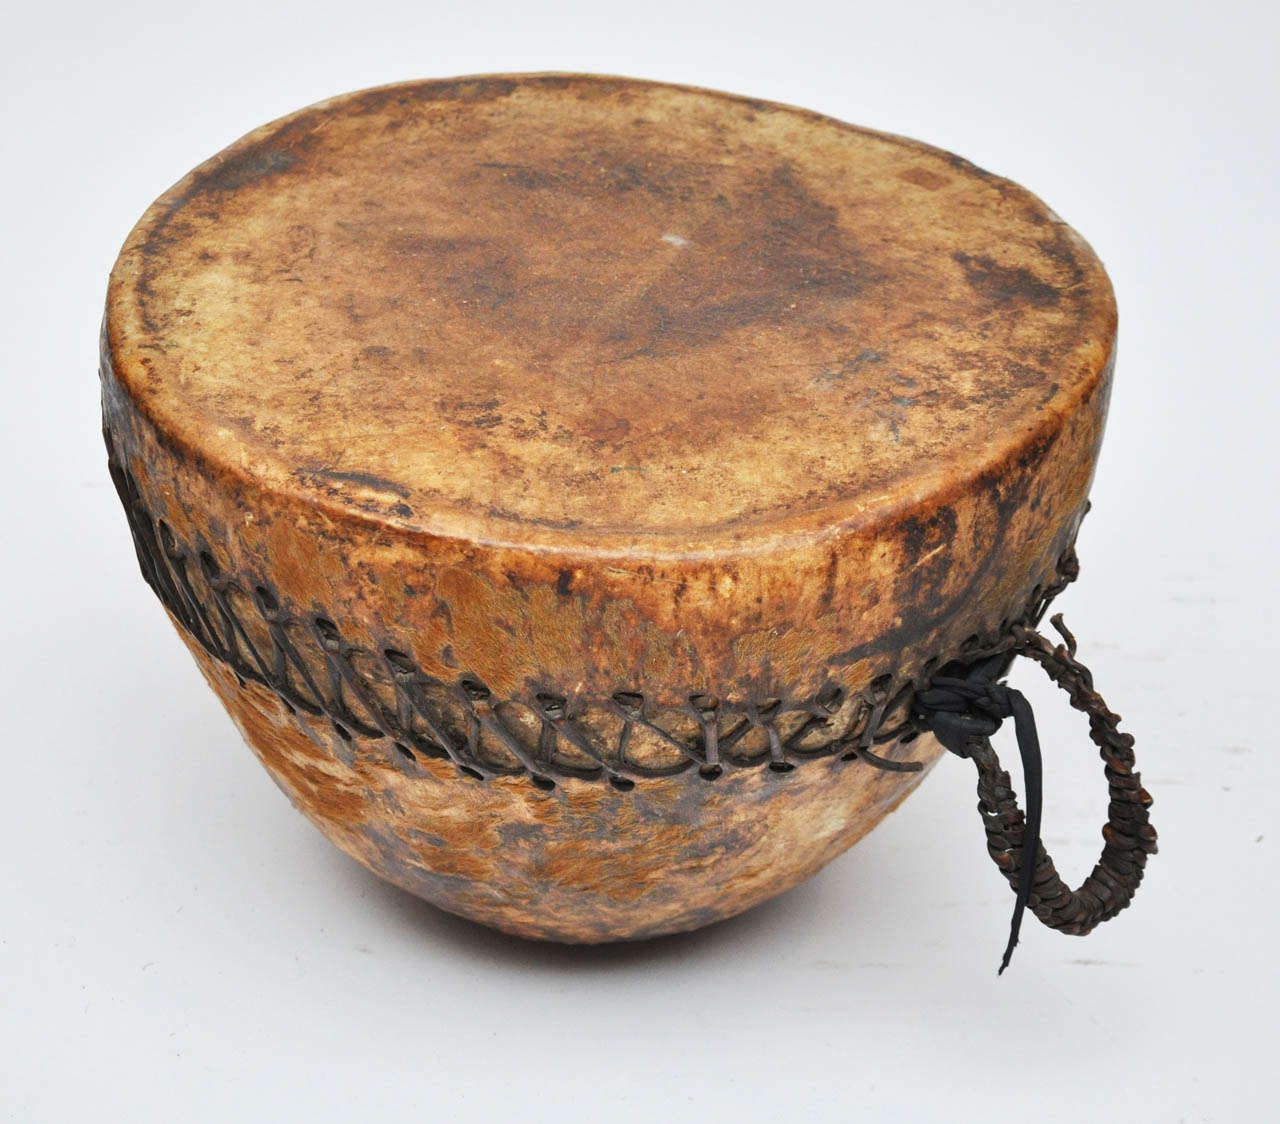 Ethiopian ceremonial hand drum used for religious and secular celebrations. The bottom of the drum is covered in animal skin and the top is stretched with rawhide. Leather binds and secures the two.